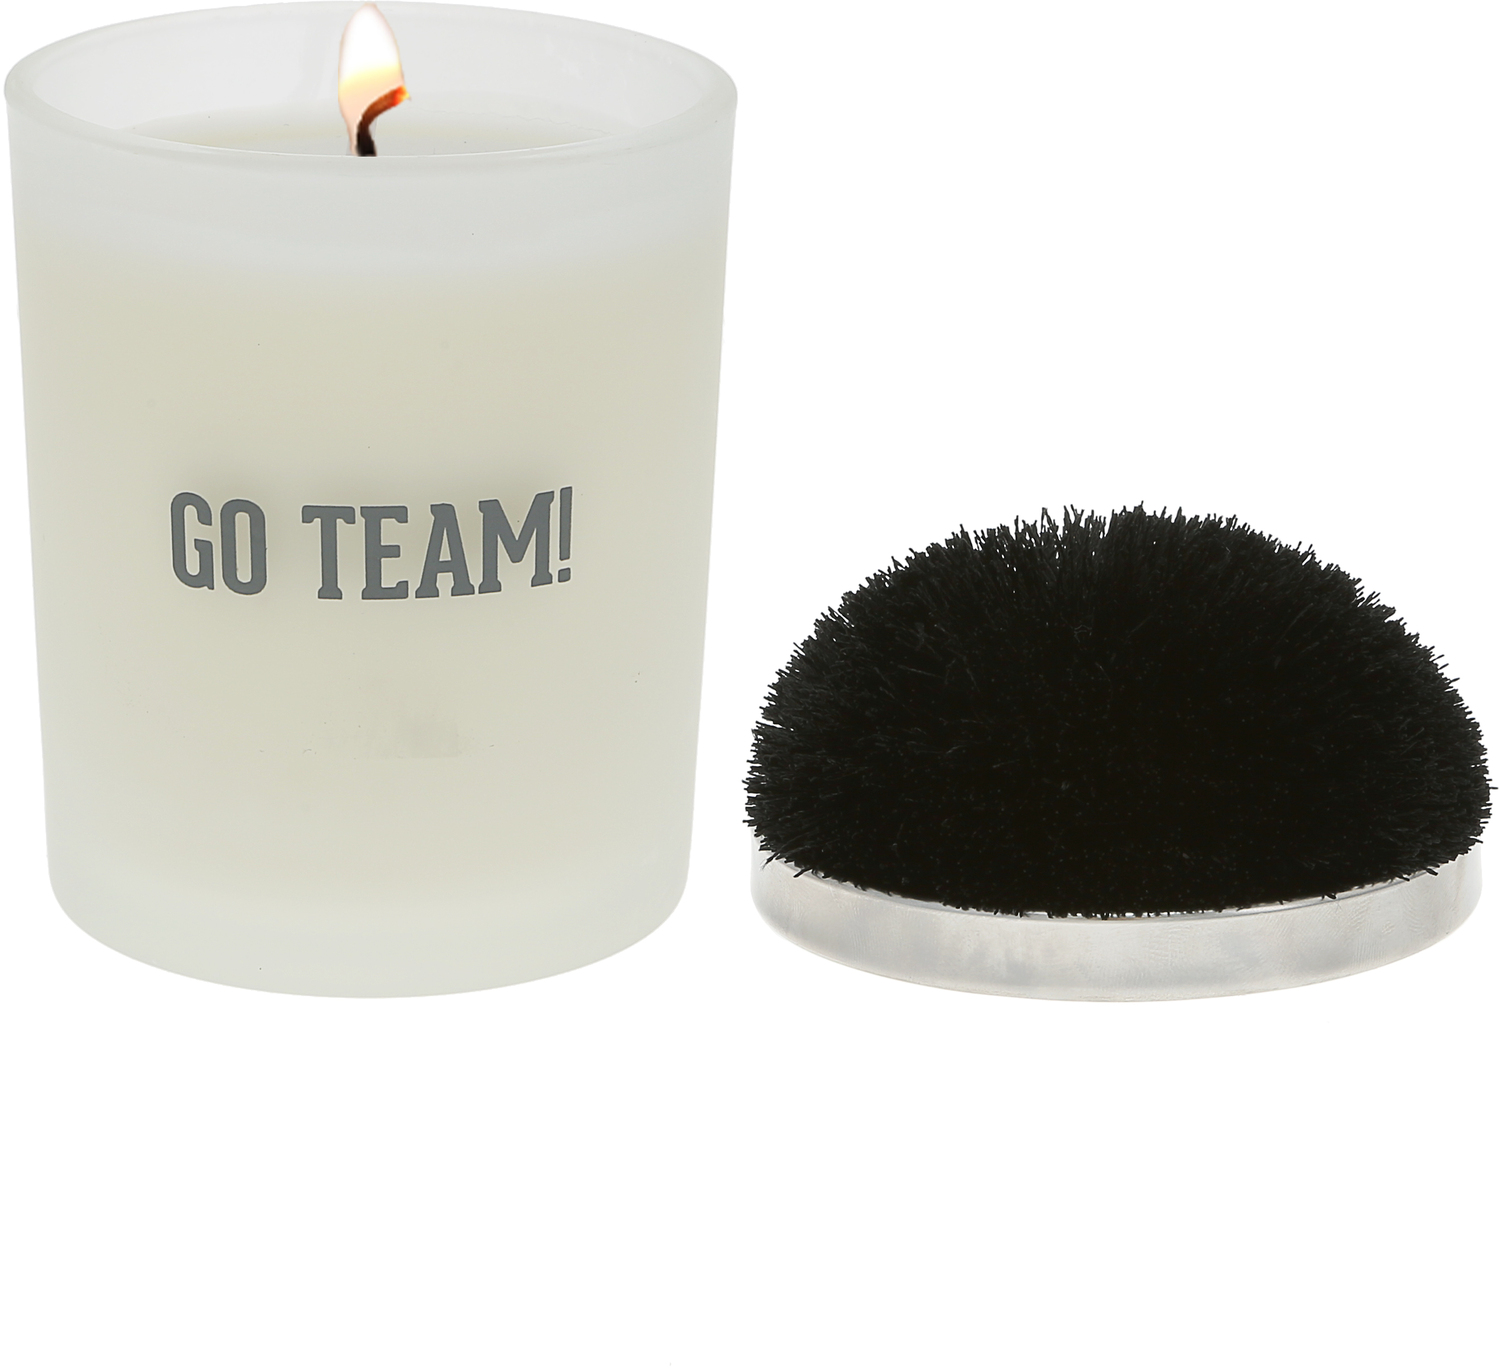 Go Team! - Black by Repre-Scent - Go Team! - Black - 5.5 oz - 100% Soy Wax Candle with Pom Pom Lid
Scent: Tranquility